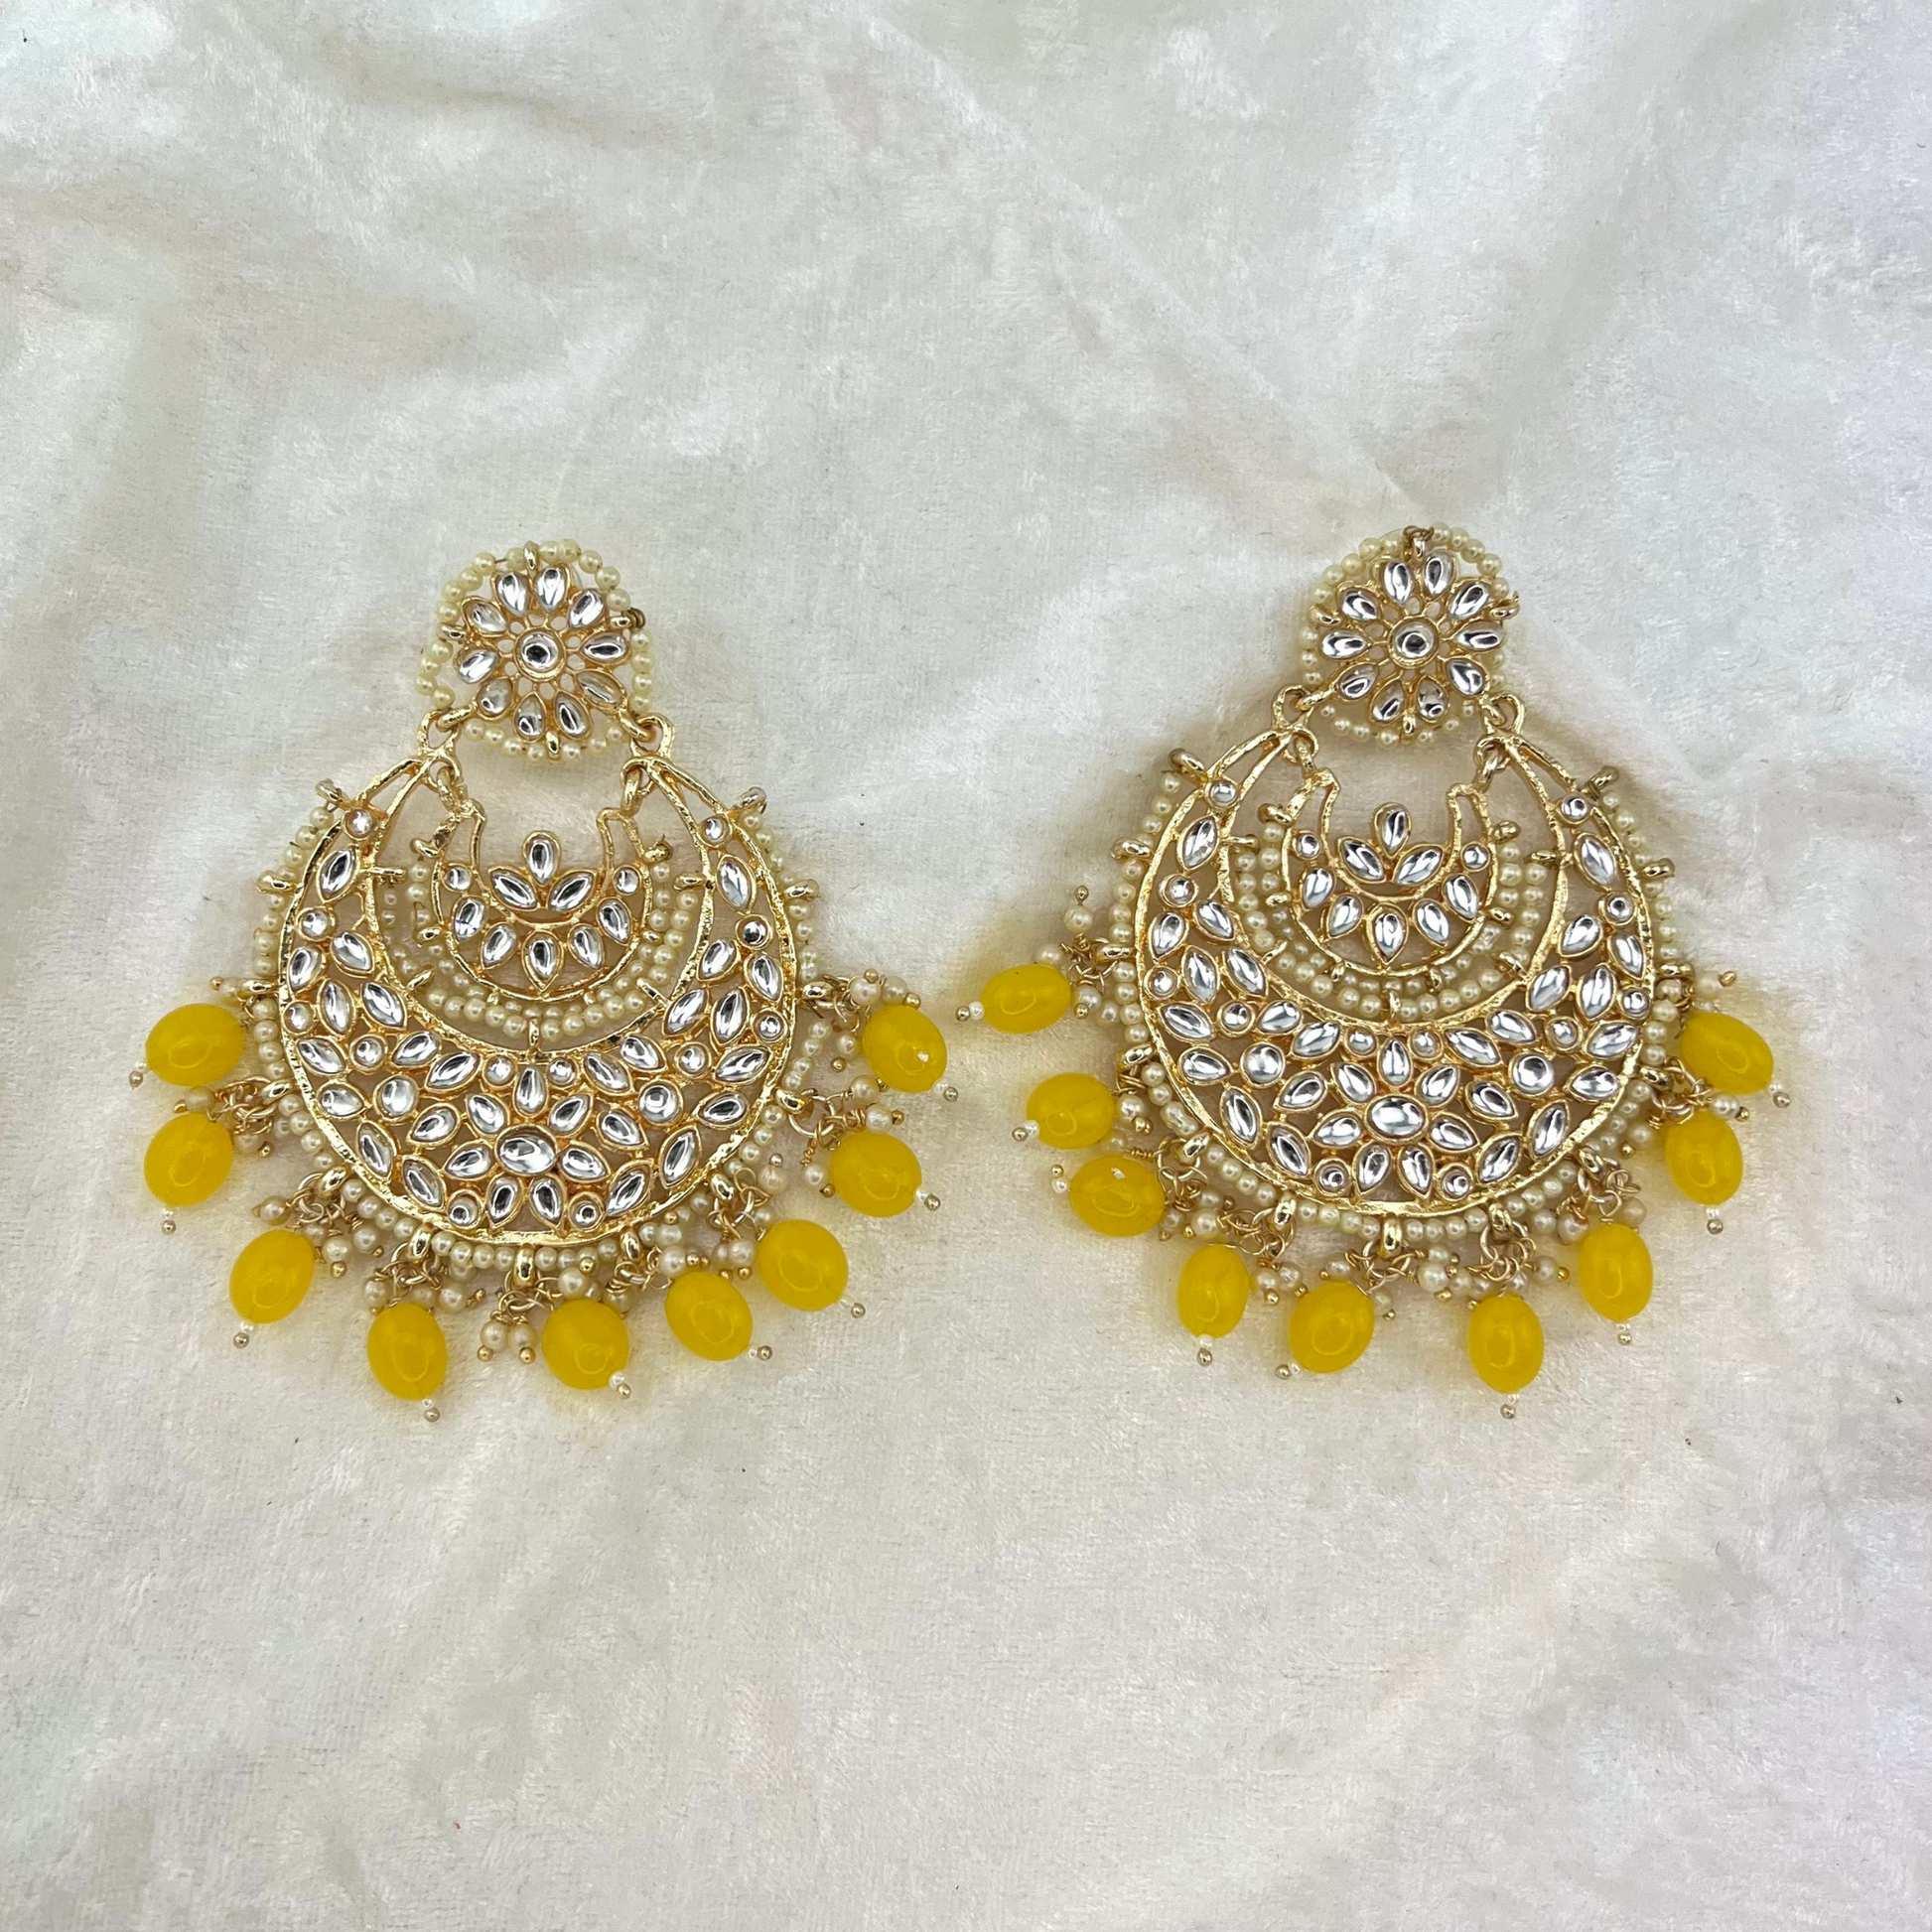 Indian wedding jewellery - large earrinfs with high quality stones and beads in yellow